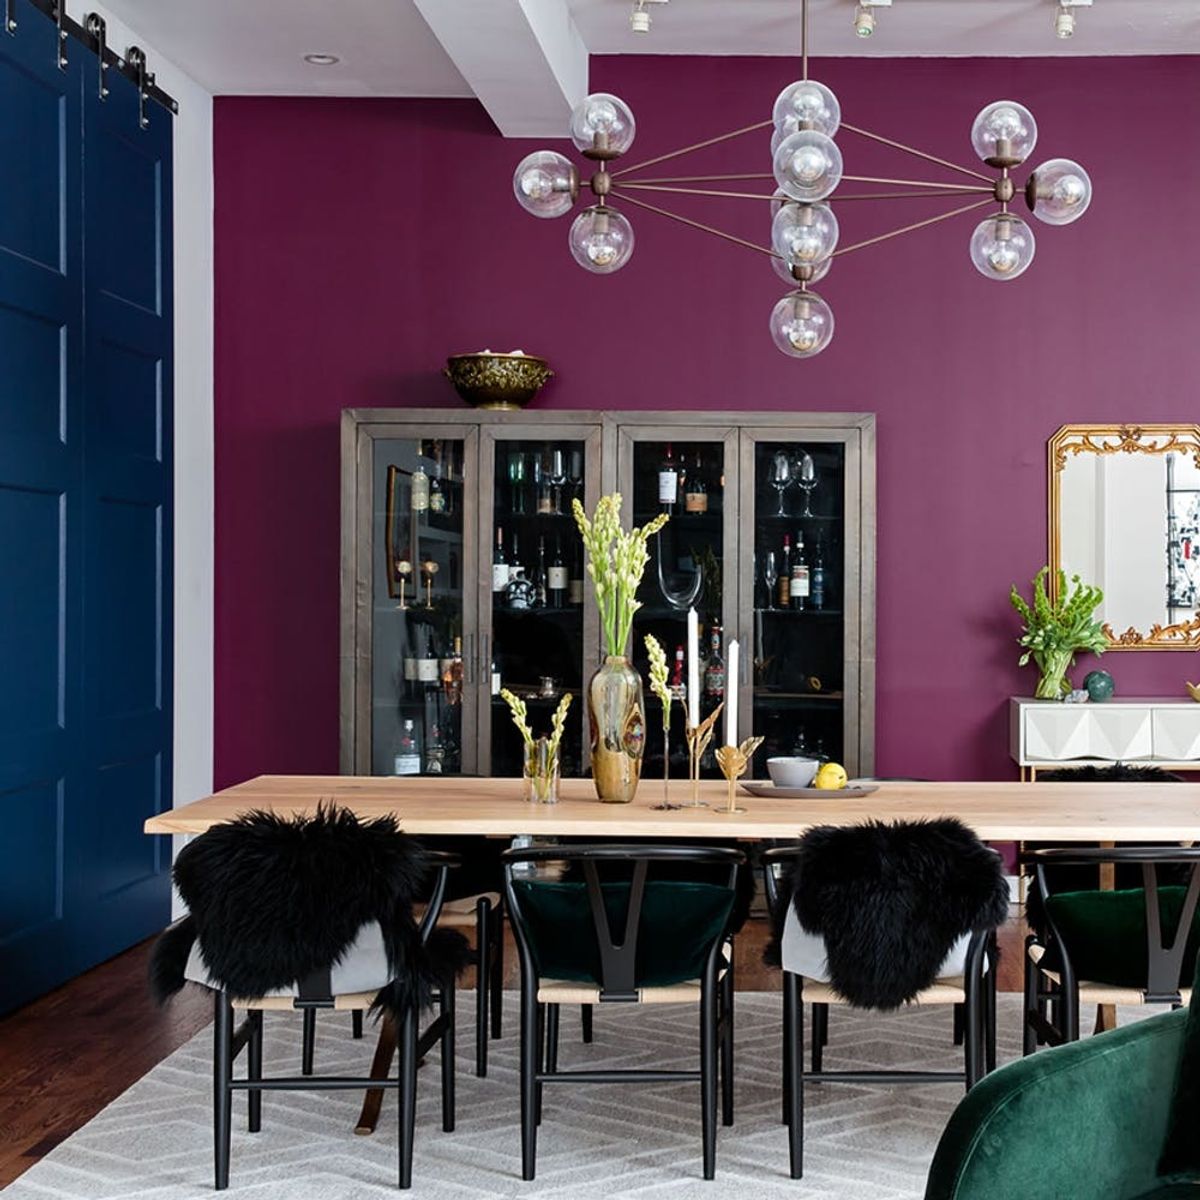 This Apartment Makeover Is the Ultimate Jewel-Tone Paint Inspiration